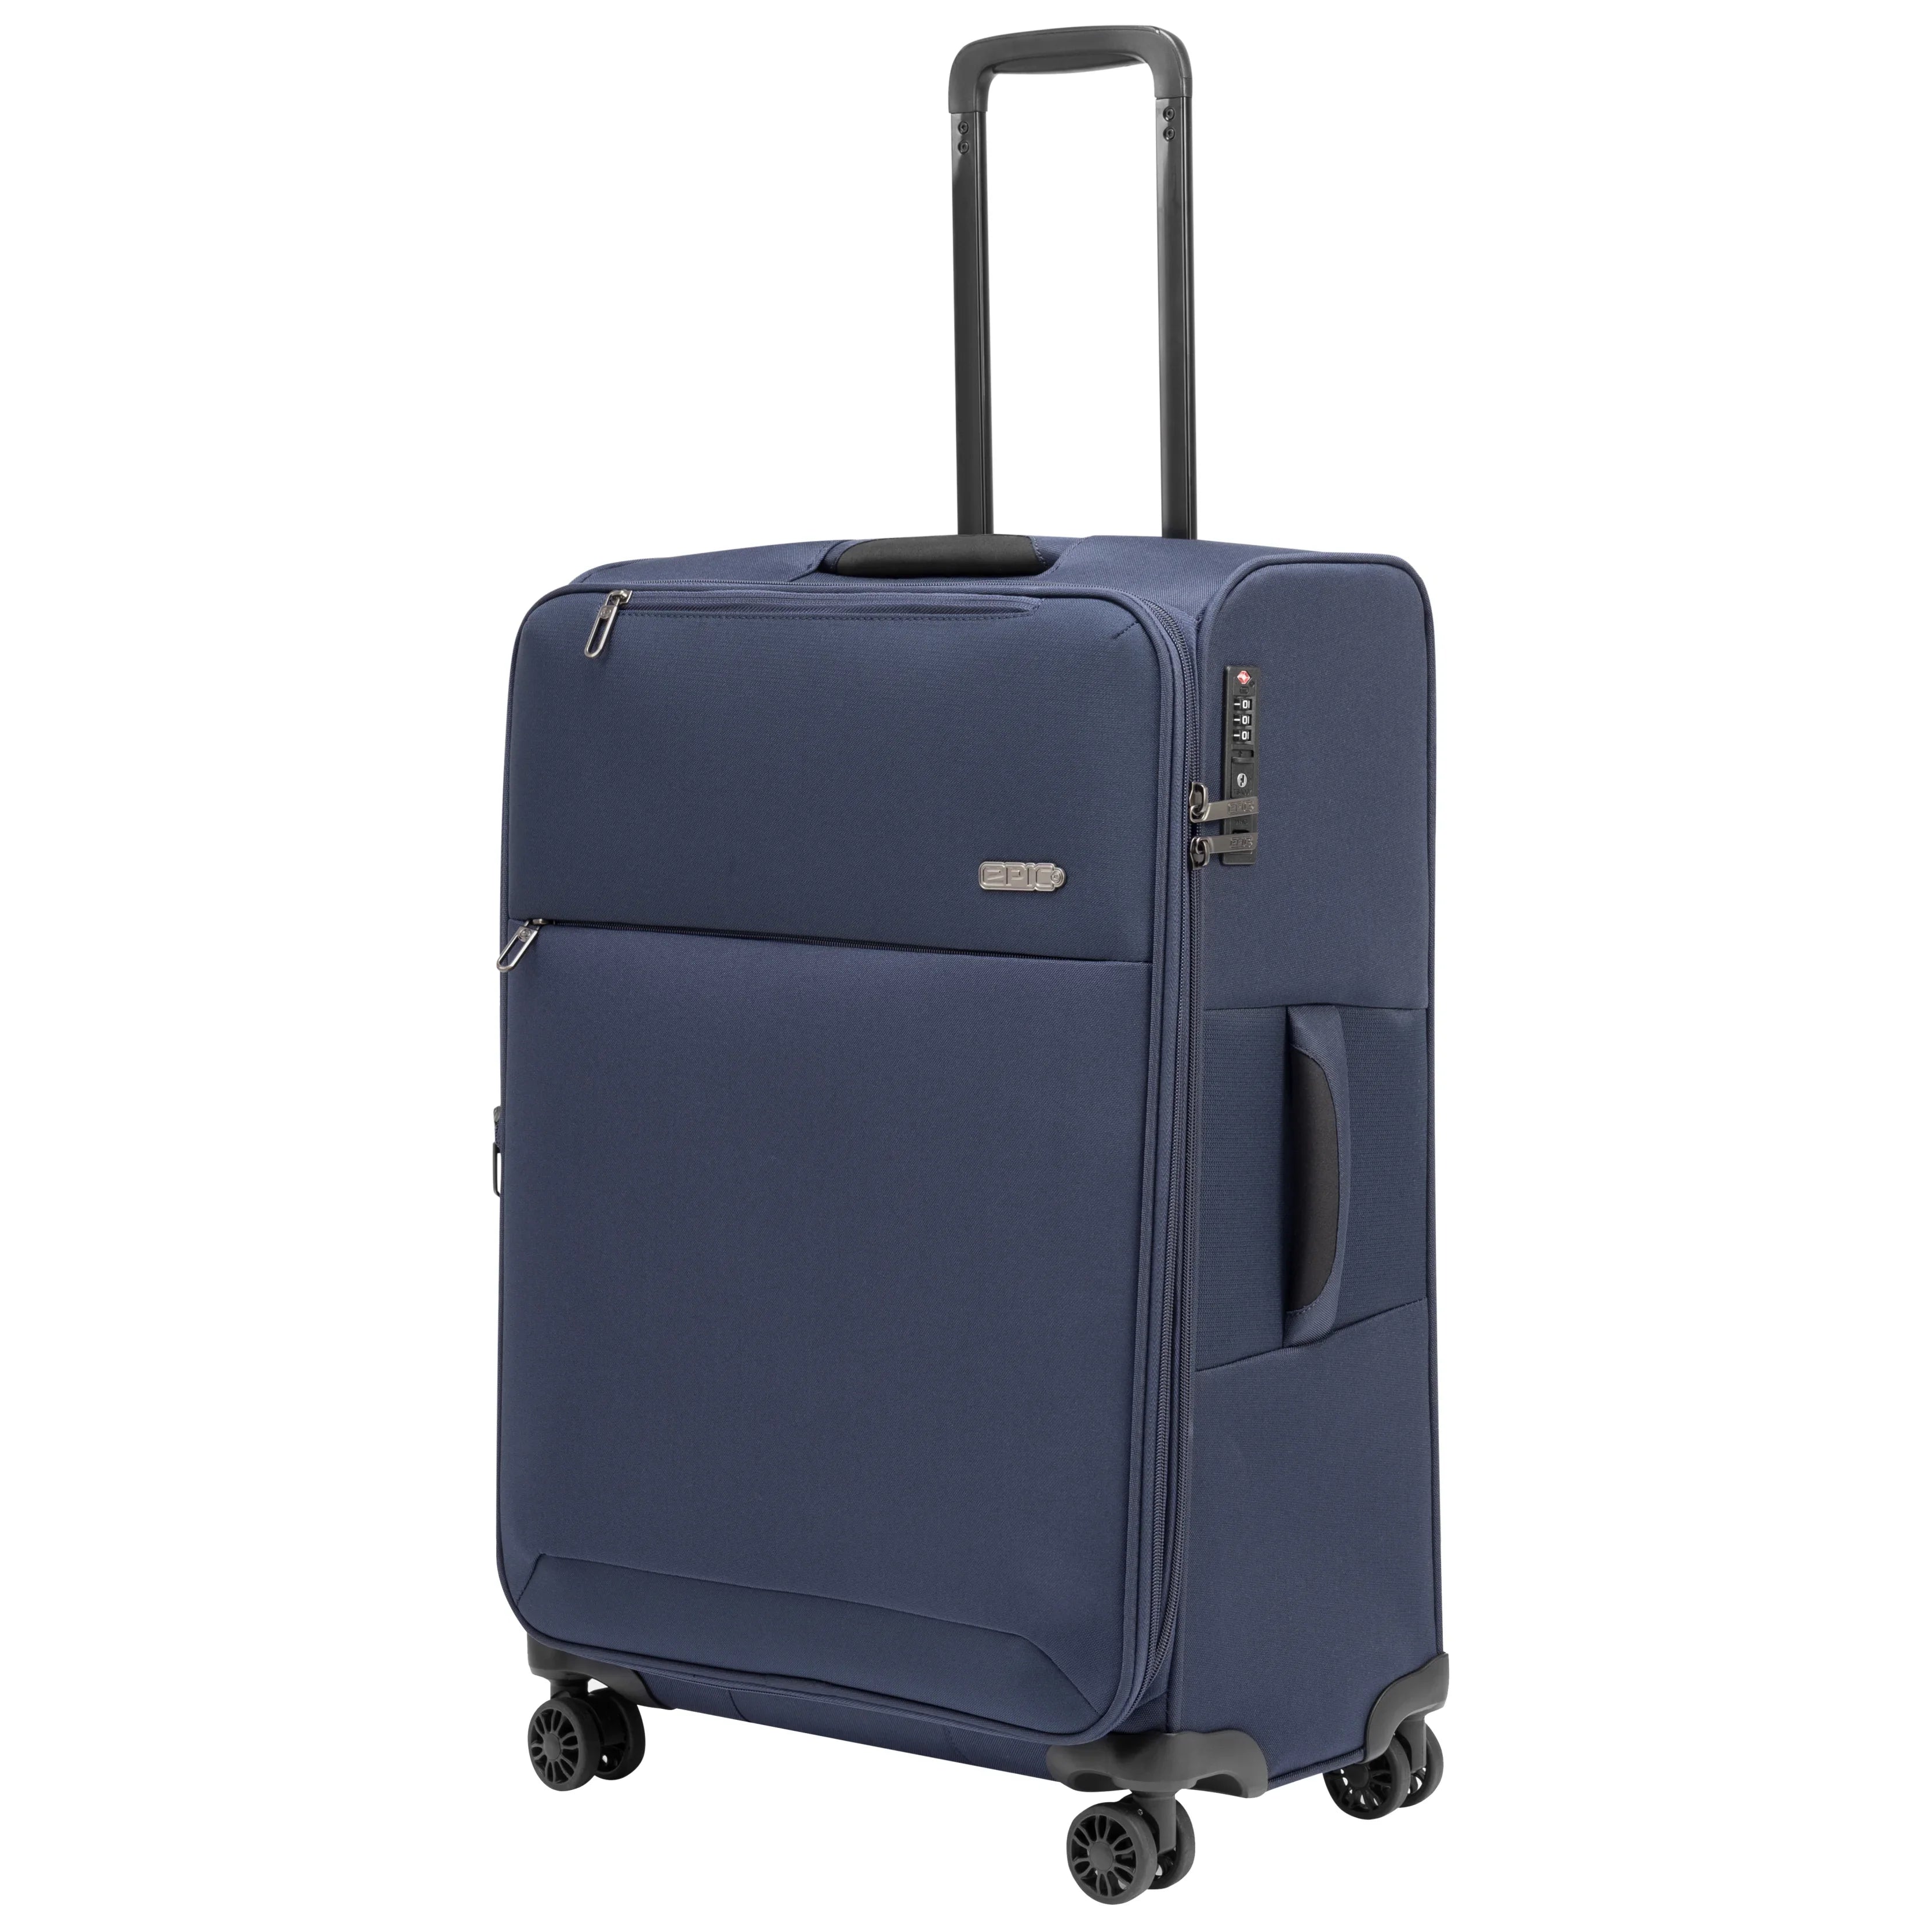 Epic Discovery Neo trolley 4 roues 67 cm - bleu marine